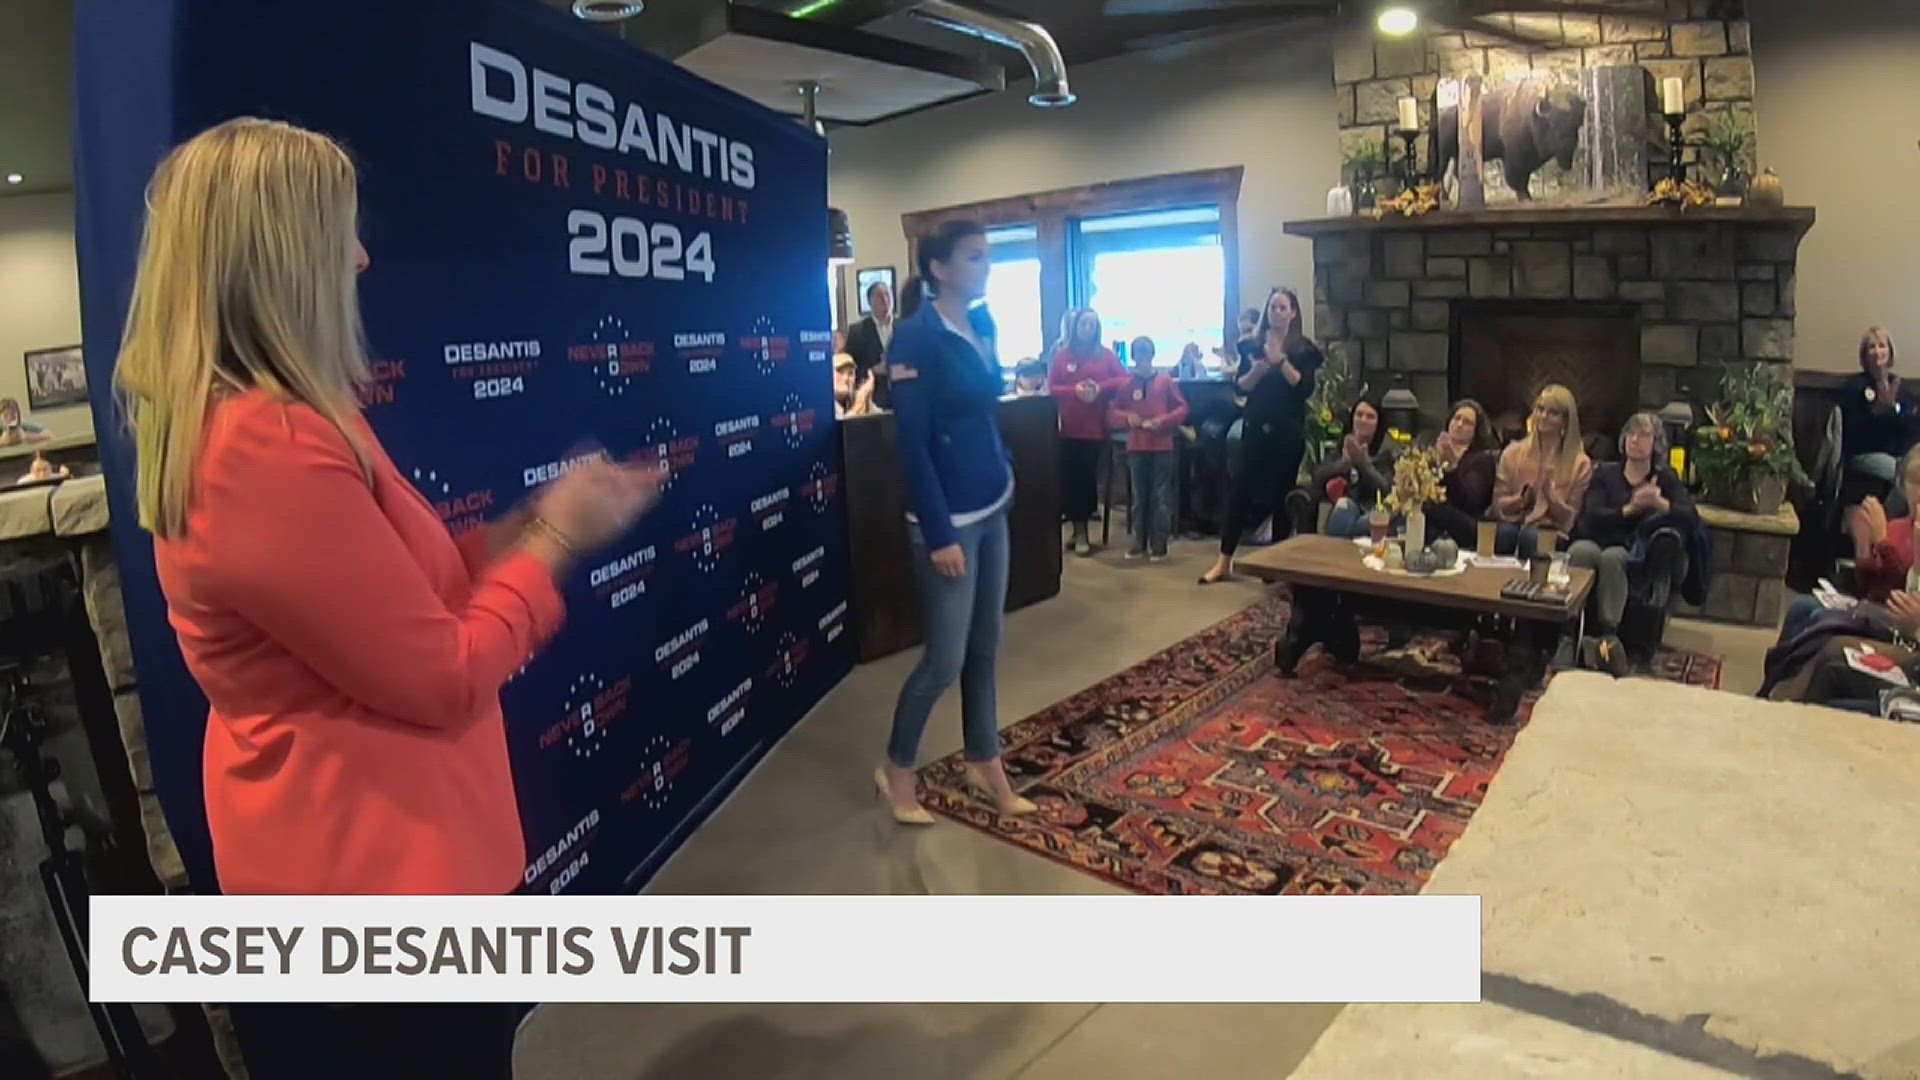 The DeSantis campaign is pouring $2 million worth of advertisements into the Hawkeye state.